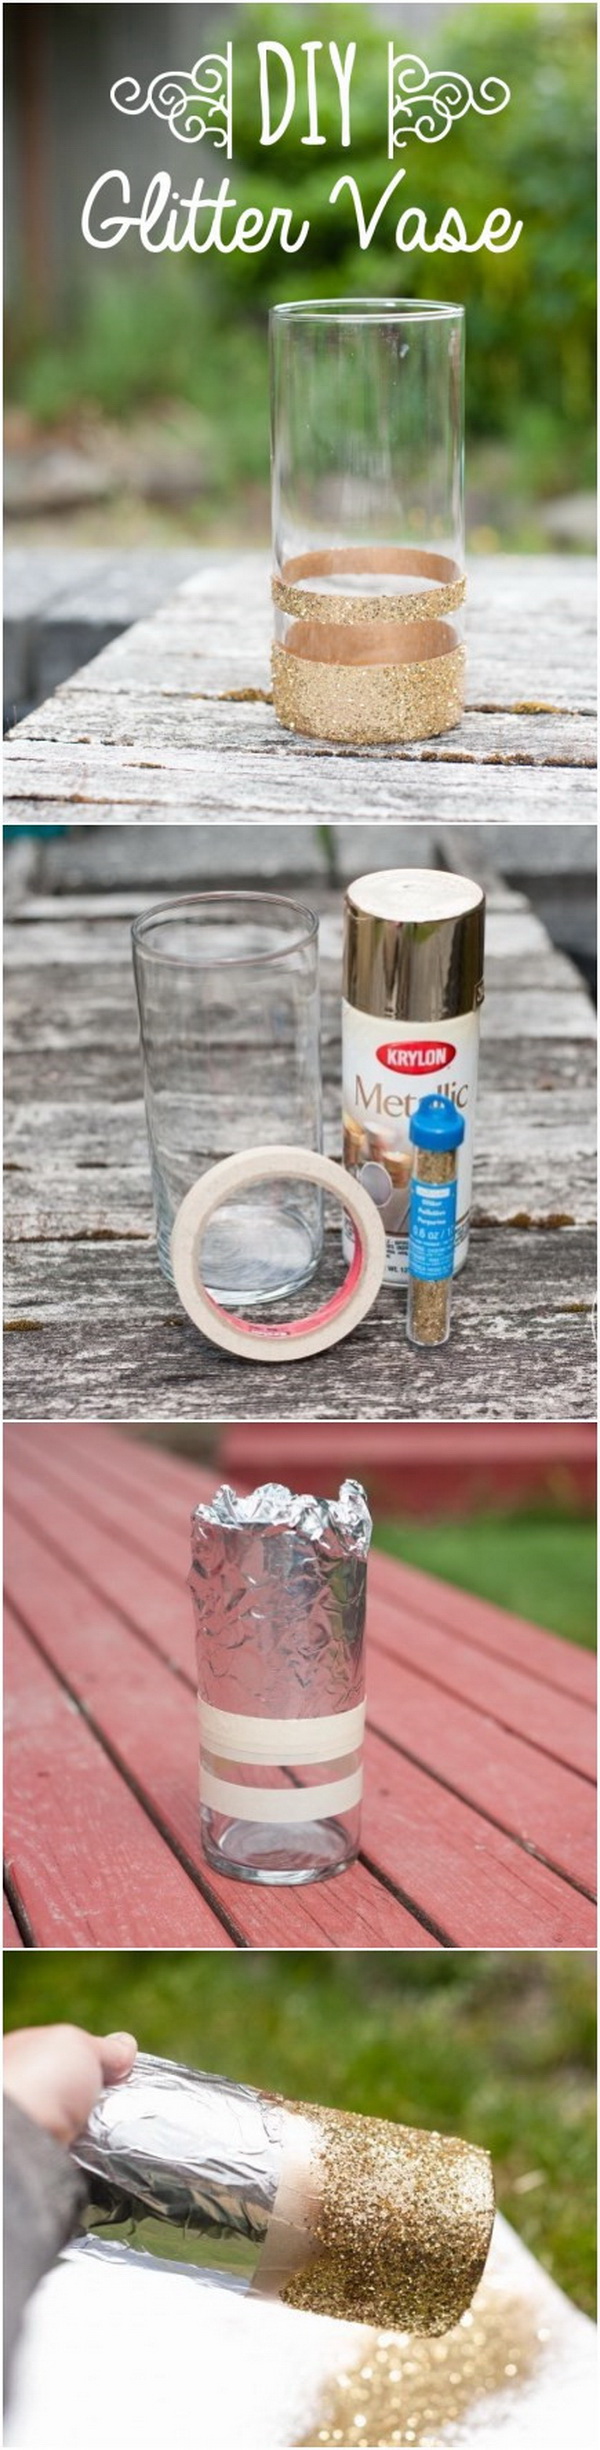 DIY Glitter Vase. Turn an ordinary vase into an extraordinary glittery vase! Beautiful centerpiece vase for the New Year's Eve party or any occasion. 